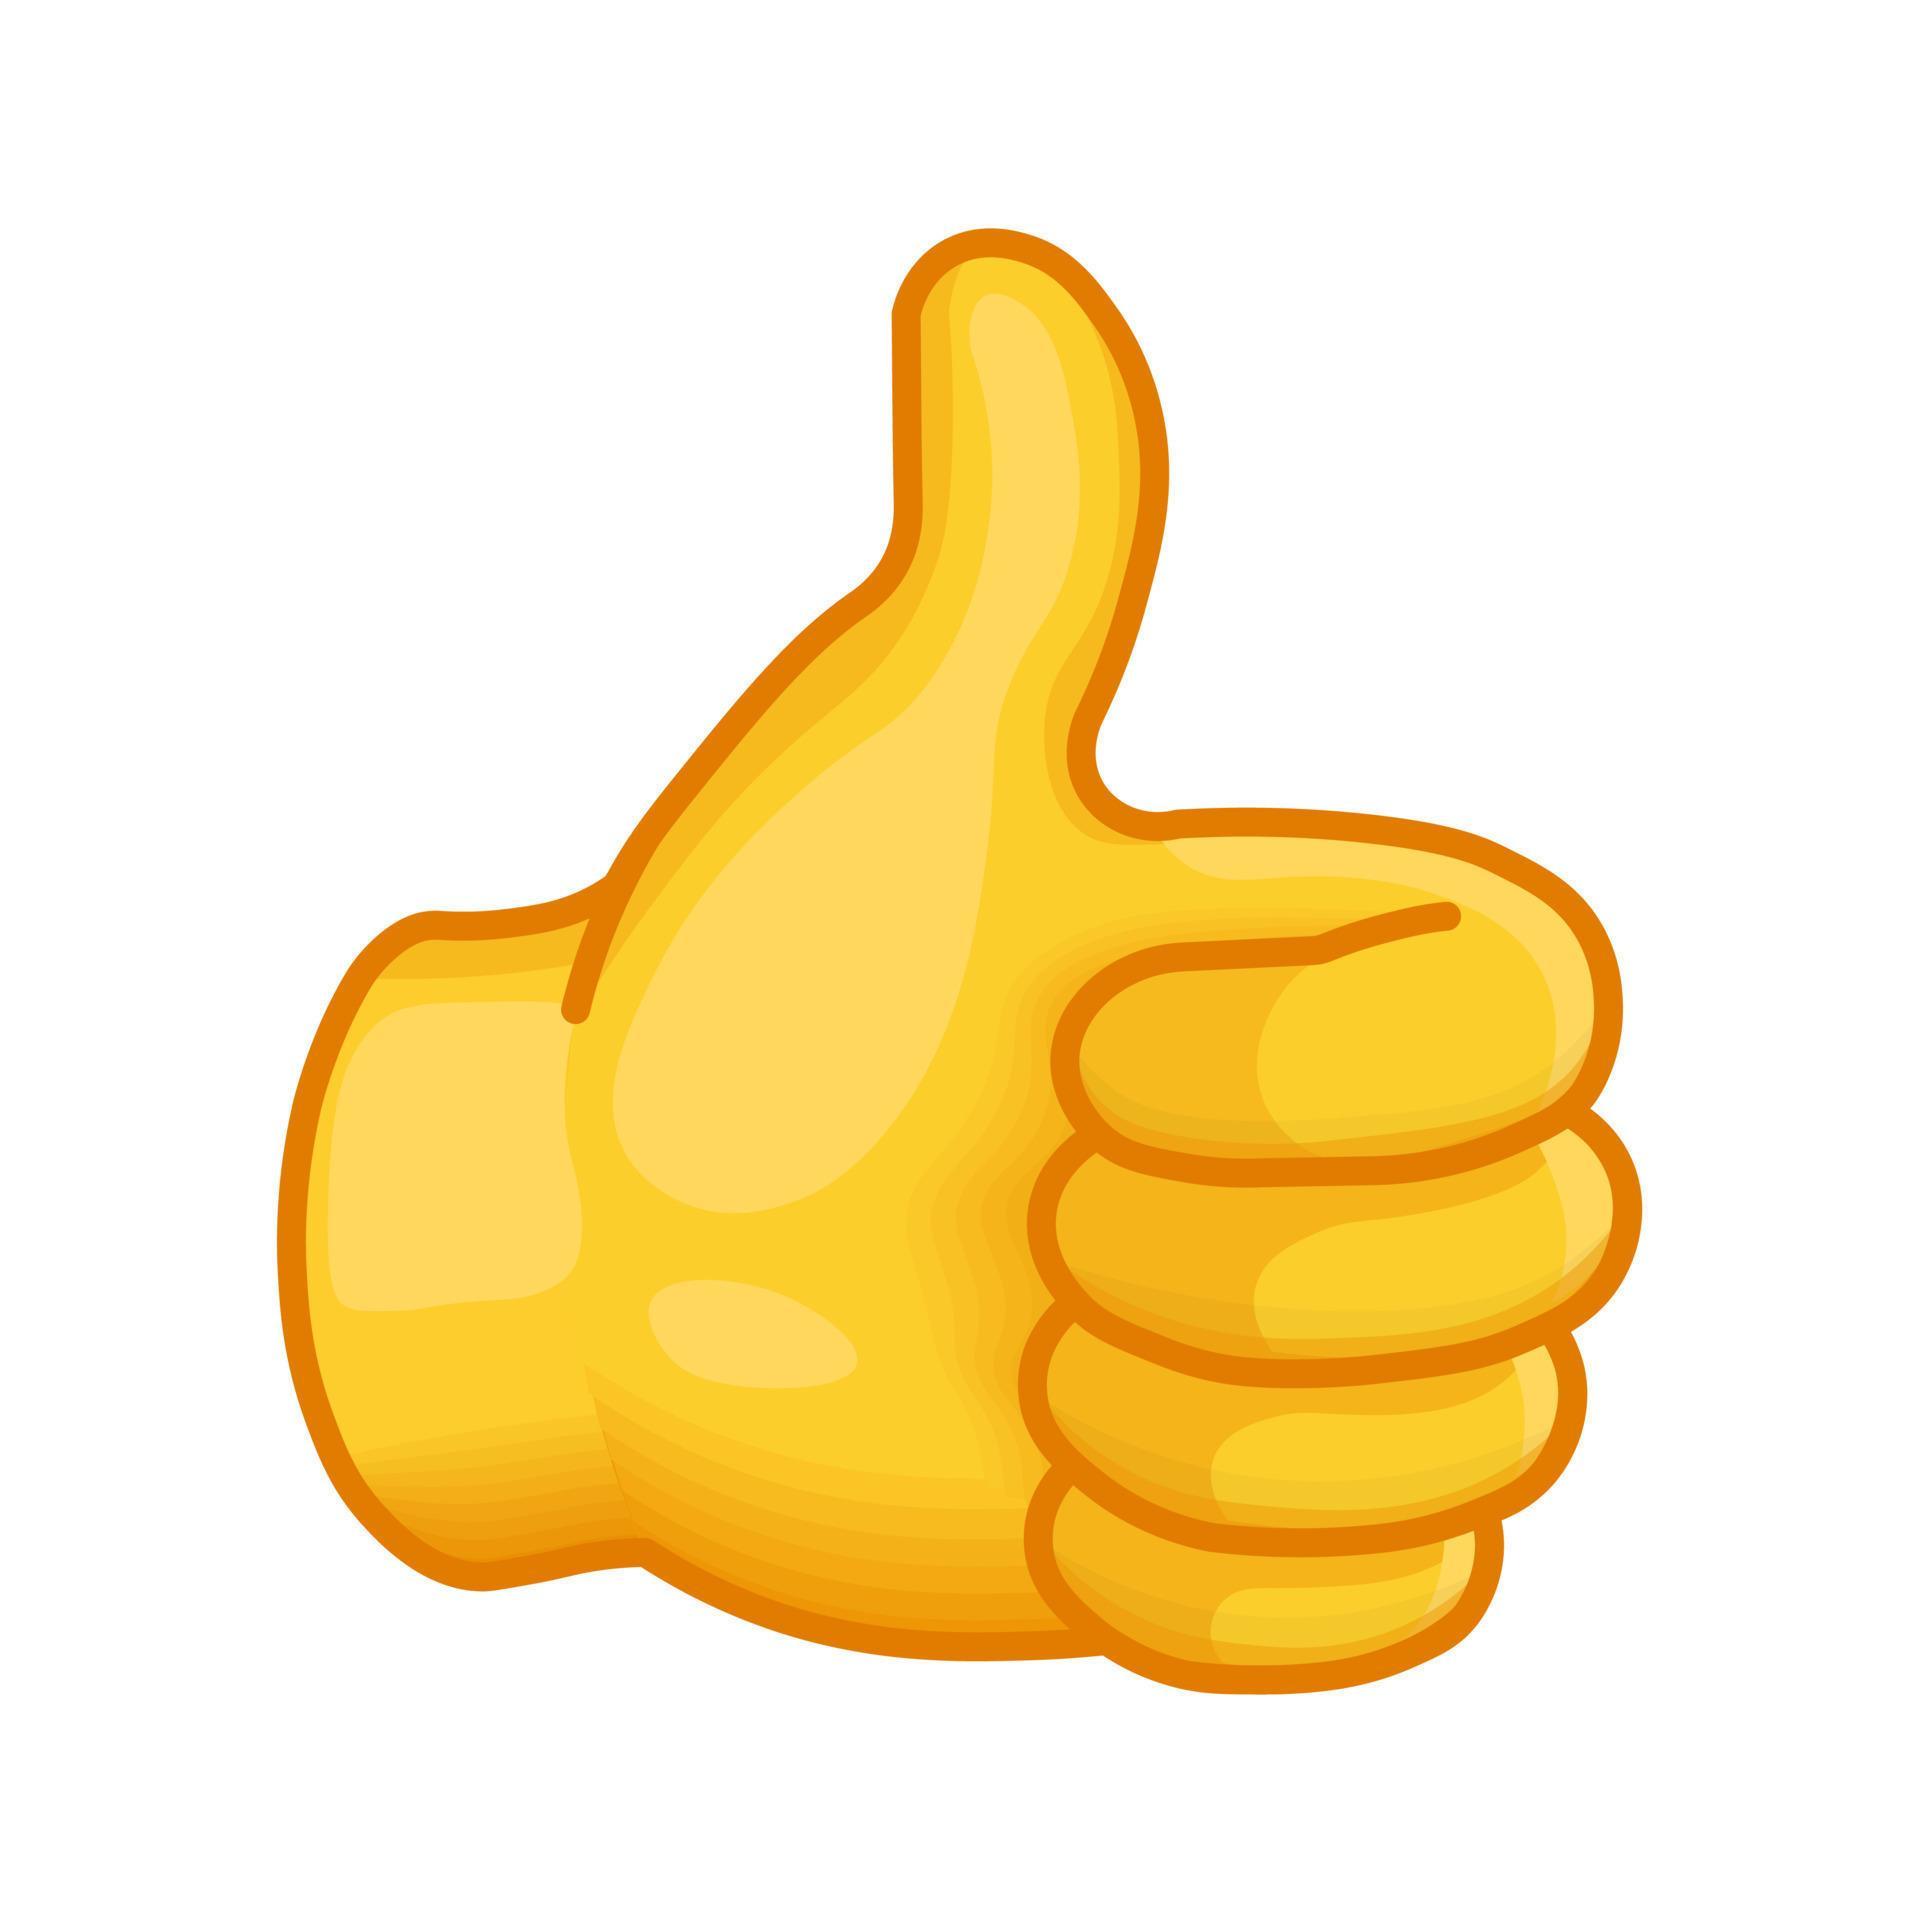 Gesture Okay or thumb up Large size of yellow emoji hand 16887478 ...